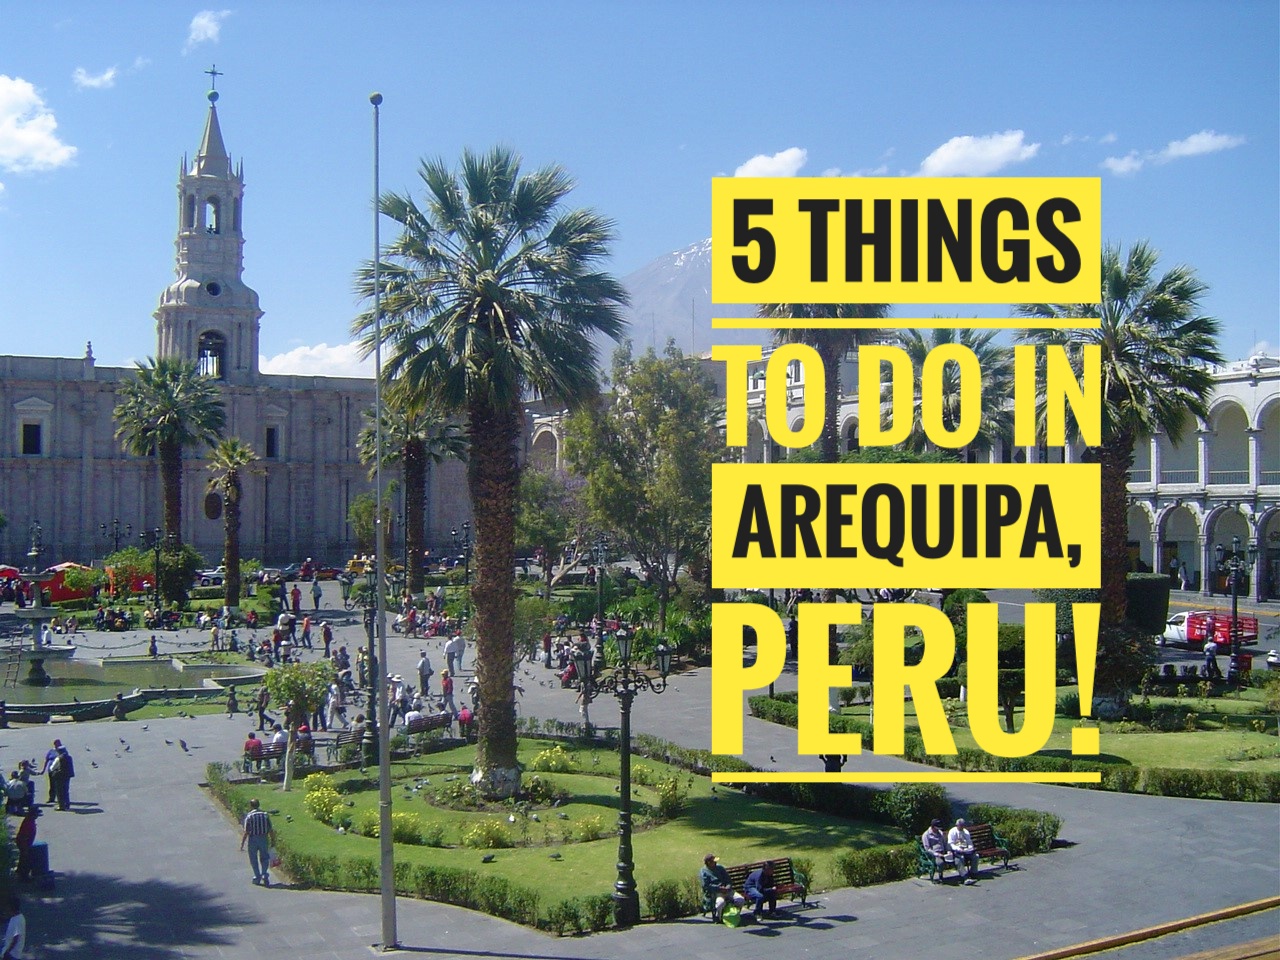 Planning to visit Peru soon? Check out these 5 things to do in the Spanish Colonial town of Arequipa, Peru. Don't miss out on these wonderful Treasures Of Traveling!